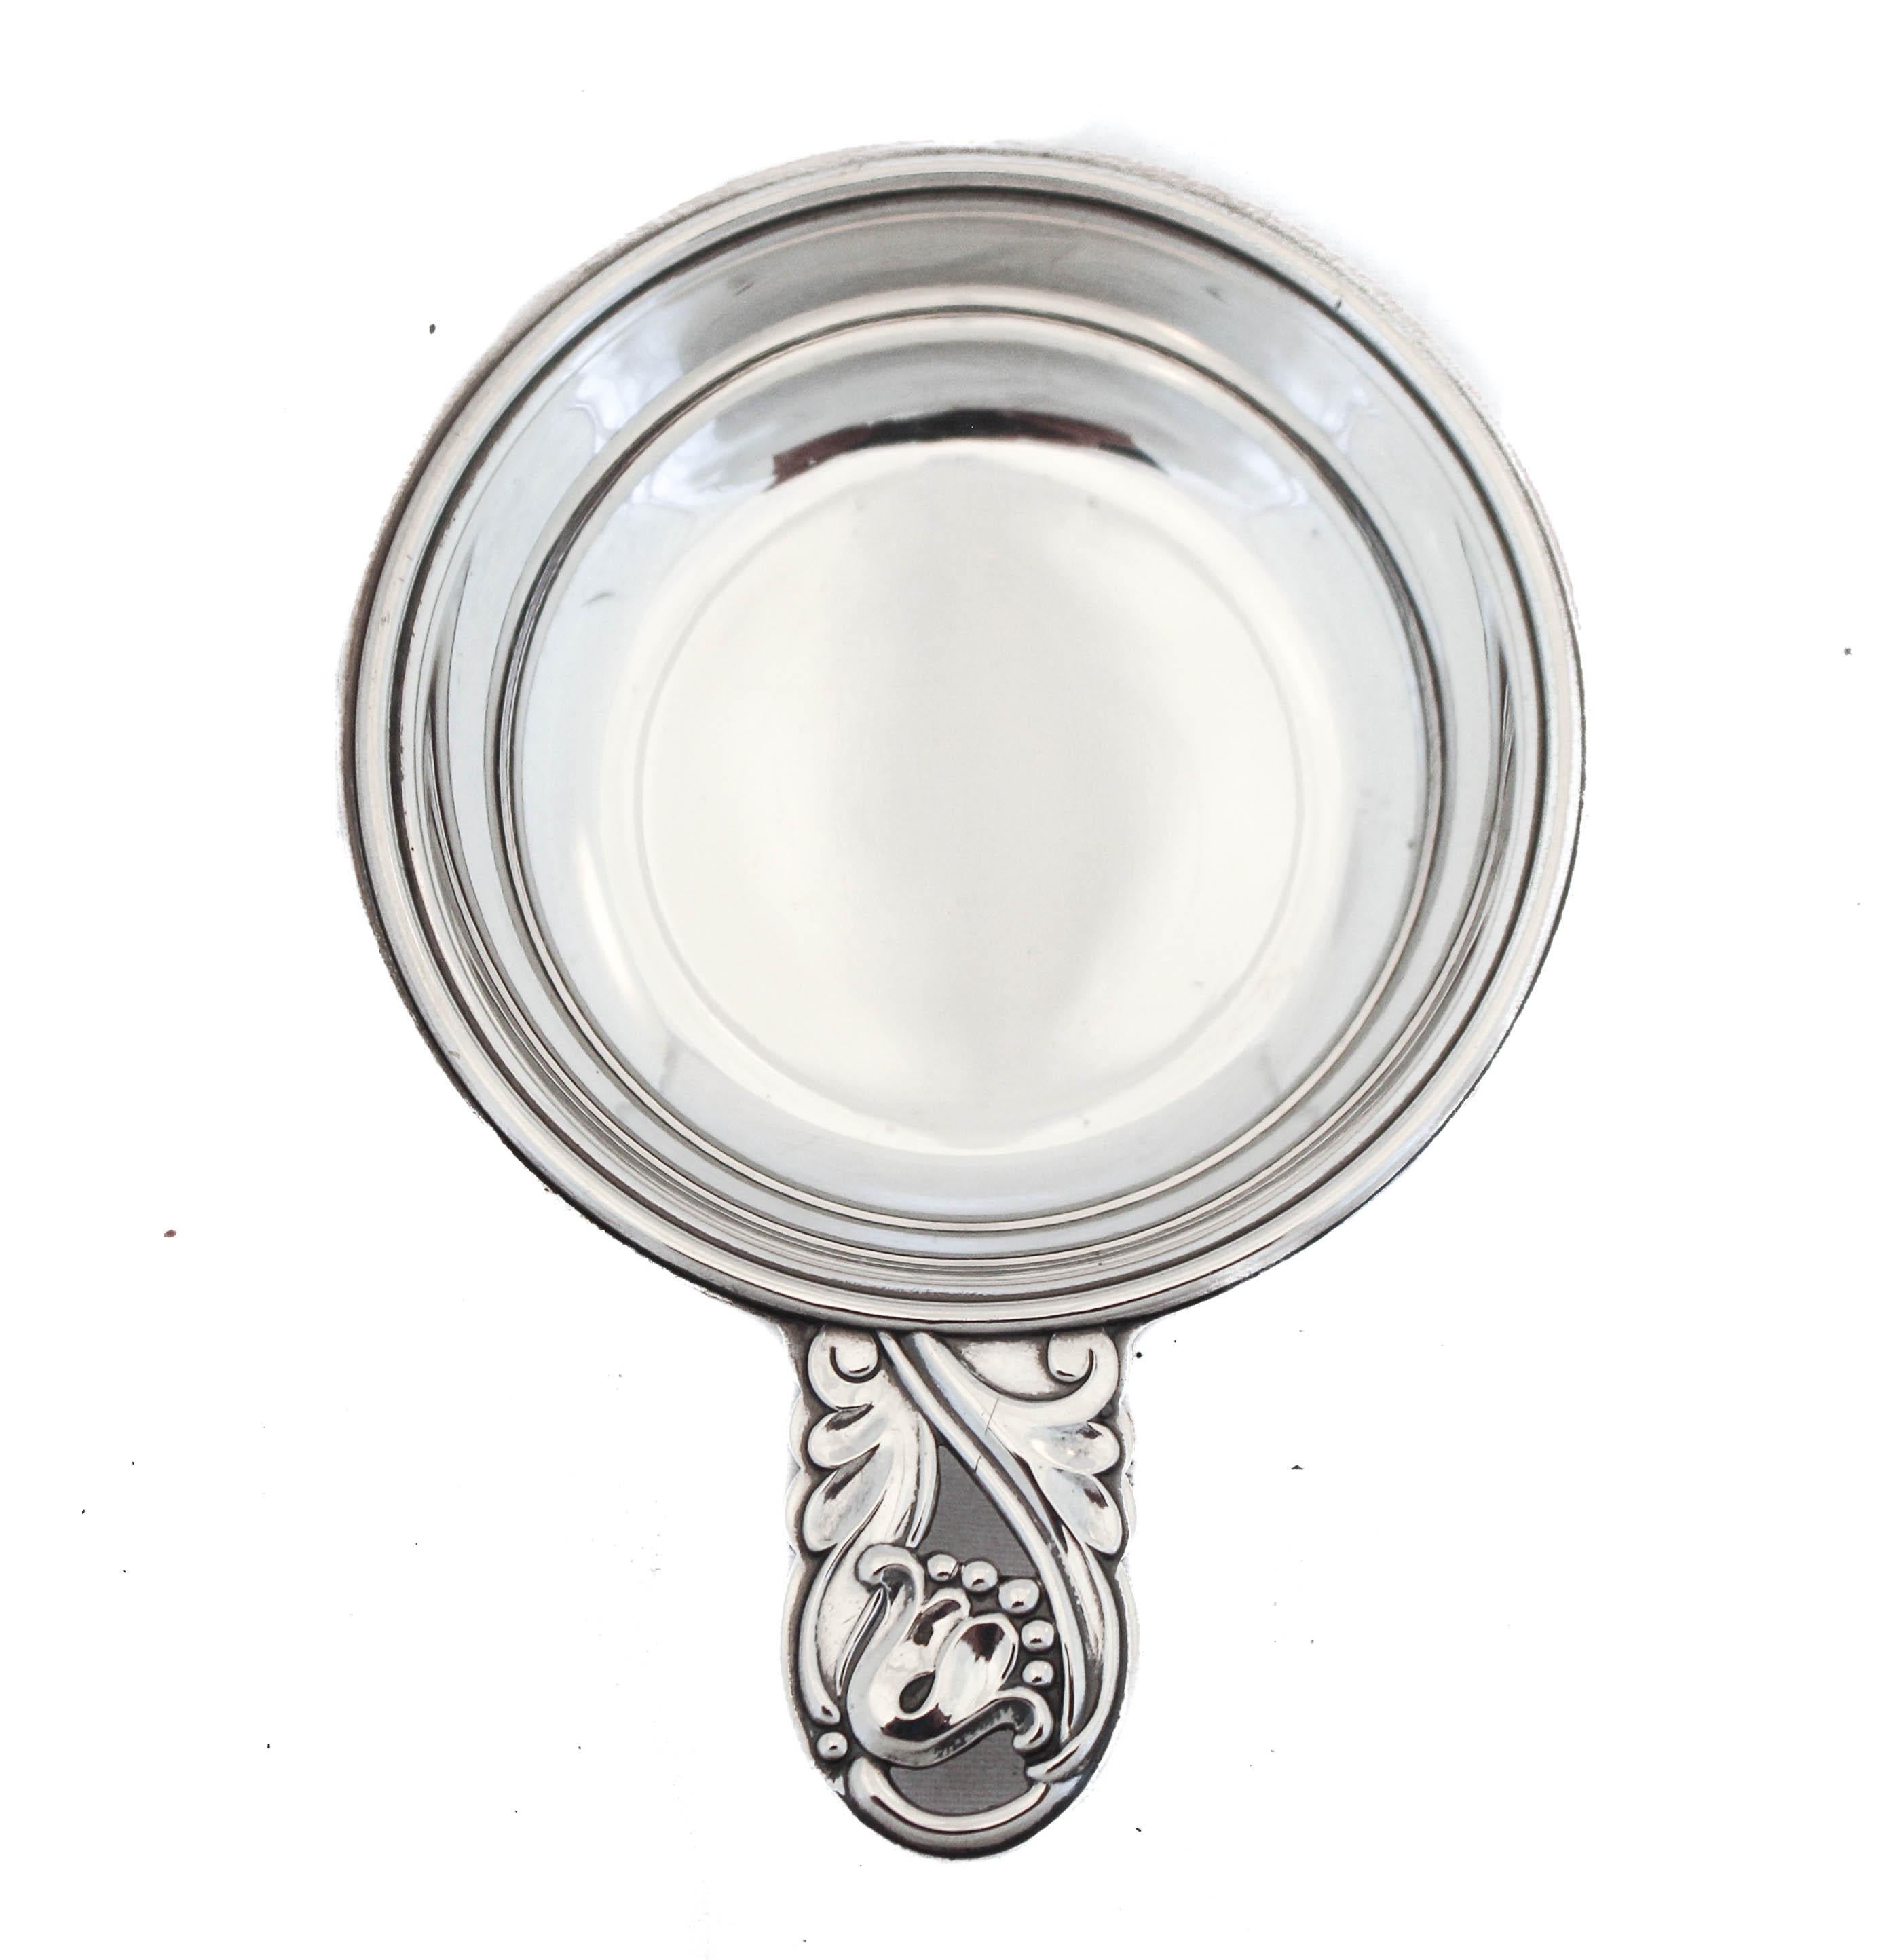 We are happy to offer you this pair of sterling silver salt cellars in the “Spring Glory” pattern by International Silver. Each cellar has a handle with its signature design. 
“Spring Glory” would go on to become one of the most popular patterns of